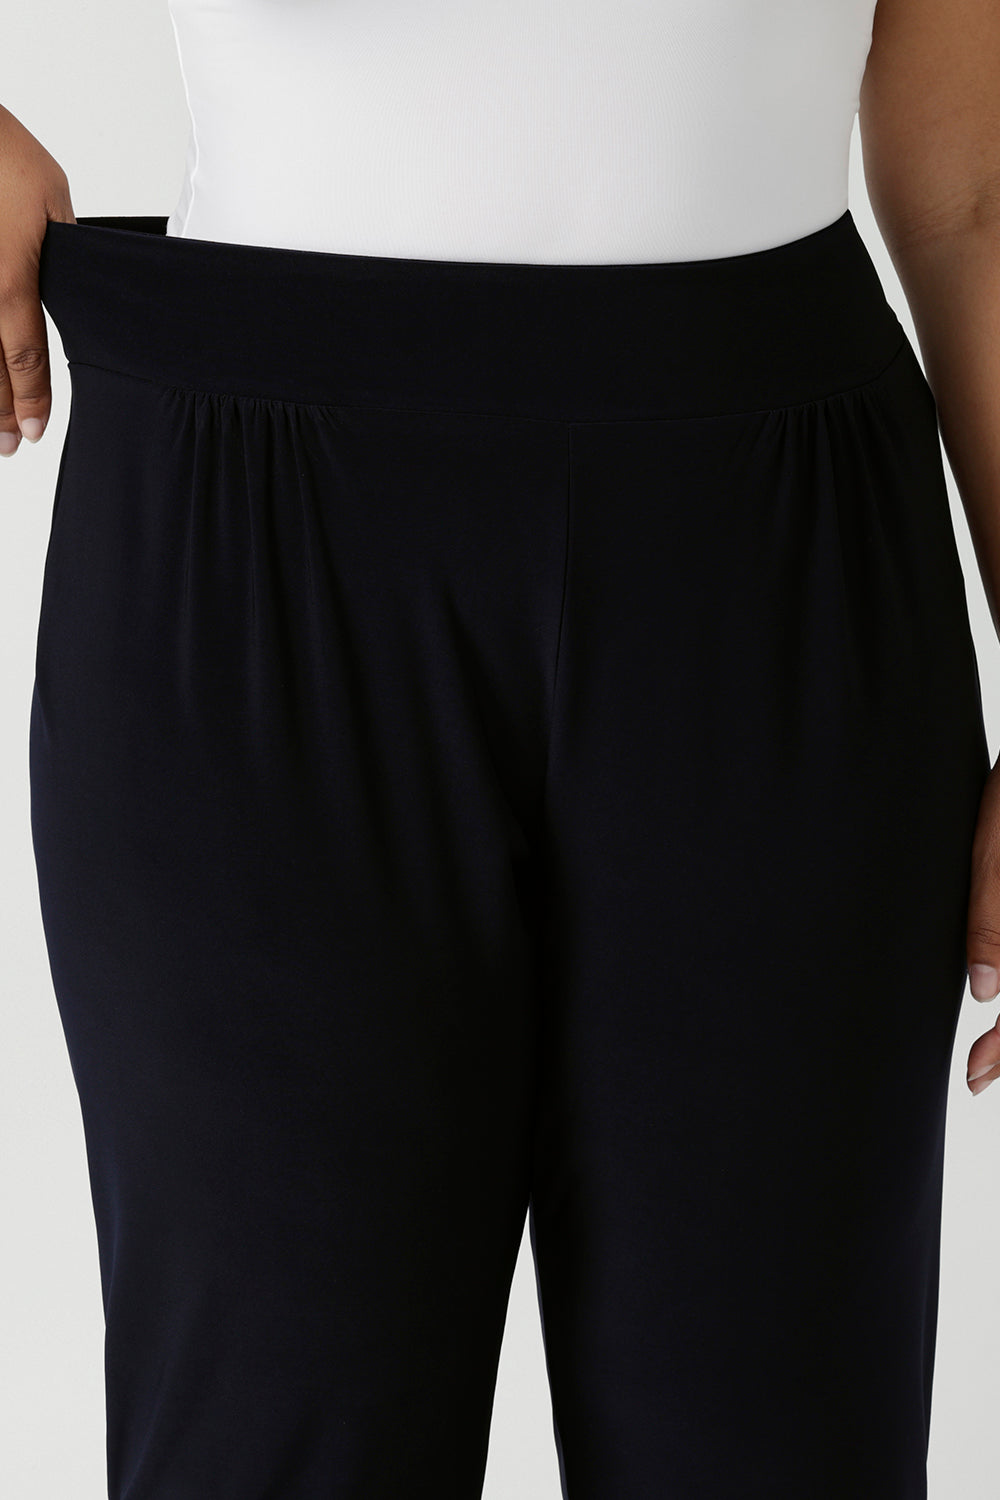 A close up of the stretchy waistband of great pants for travel, these dropped crotch, single seam navy pants are made stretchy jersey for ultimate comfort. shop these comfy navy pants for your travel and capsule wardrobe now! Available in sizes 8-24.